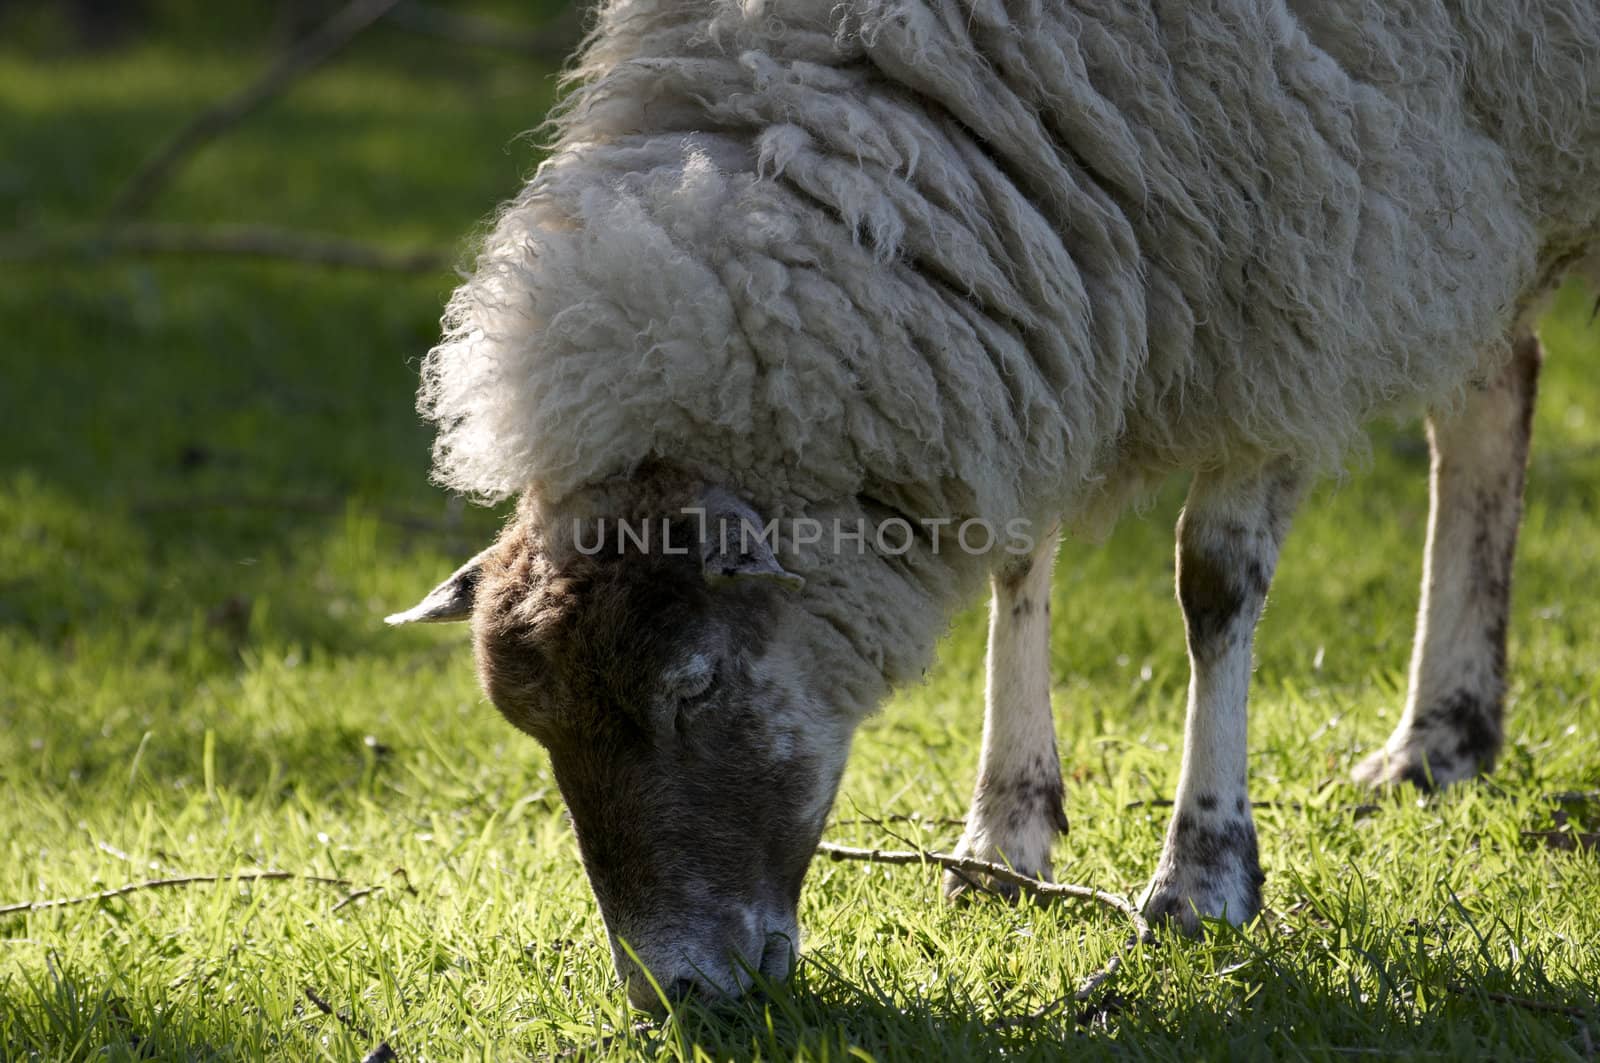 A sheep in a field in the sunshine